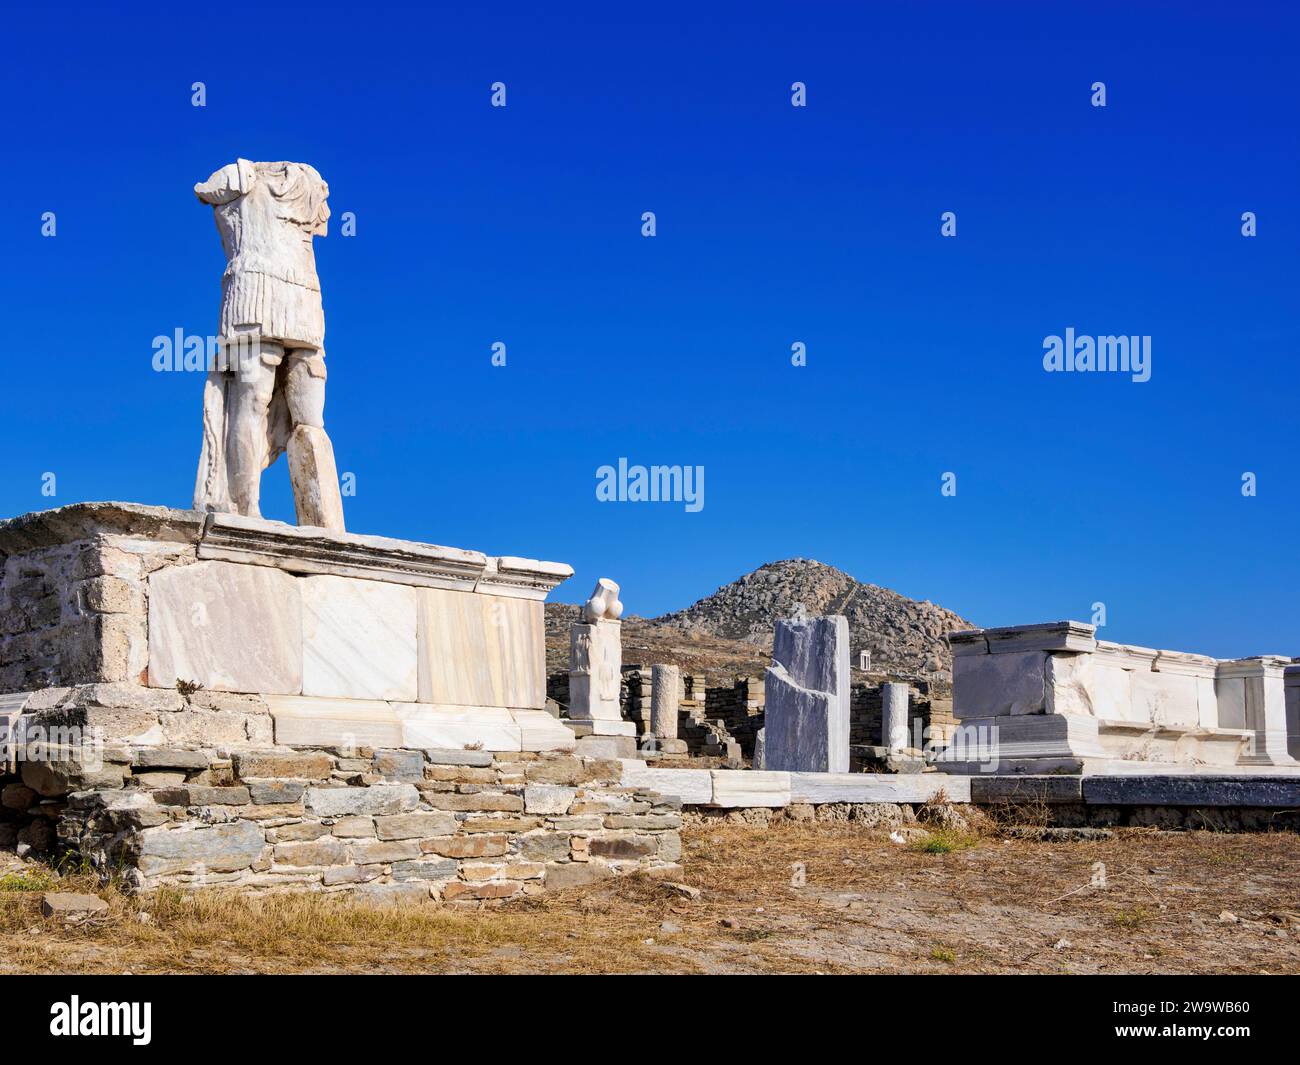 Headless Statue at the Delos Archaeological Site, Delos Island, Cyclades, Greece Stock Photo